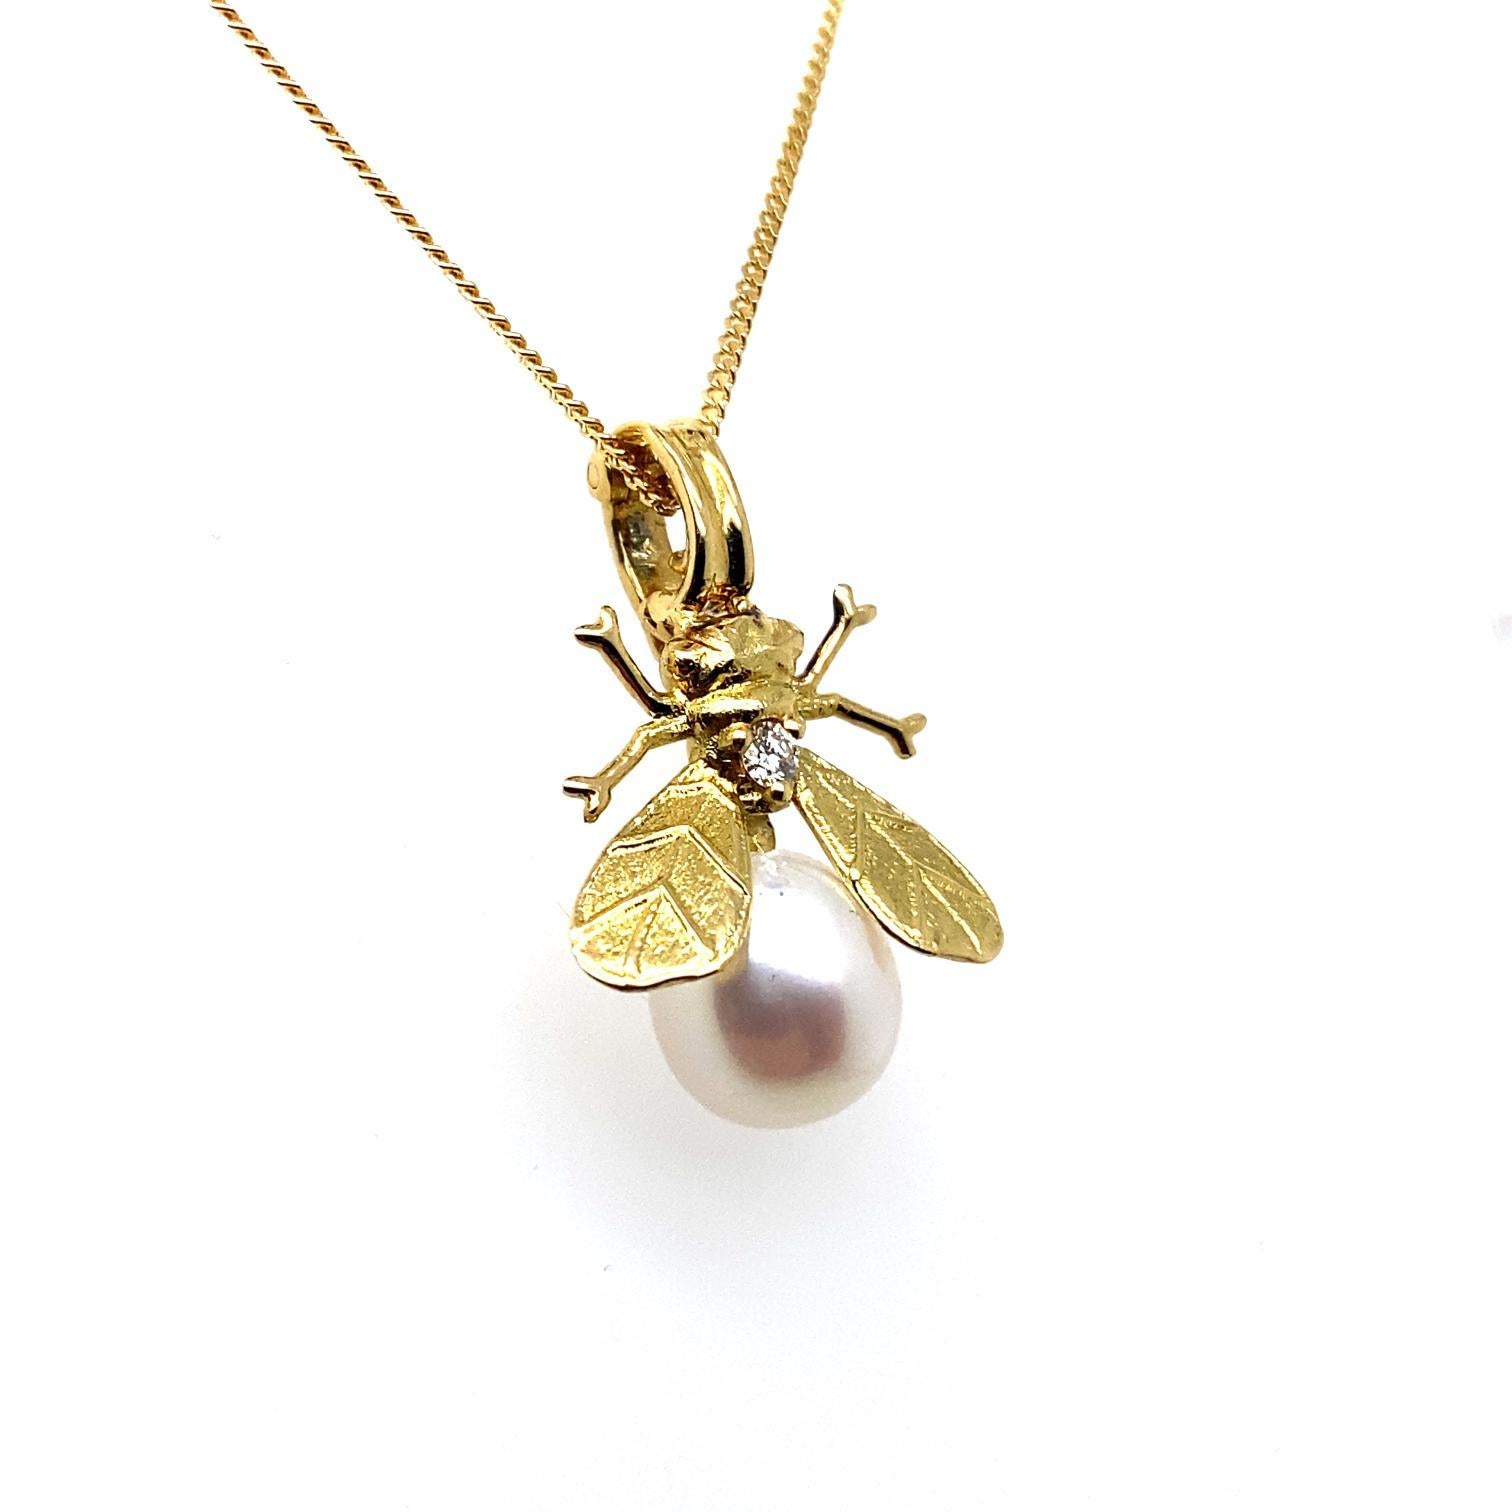 A vintage bee stud pearl diamond pendant in 18 karat yellow gold. Circa 2000.

The pendant is designed in yellow gold, and set to its thorax with a single round brilliant cut diamond for a total of 0.05 carats approximately assessed as G colour, VS1